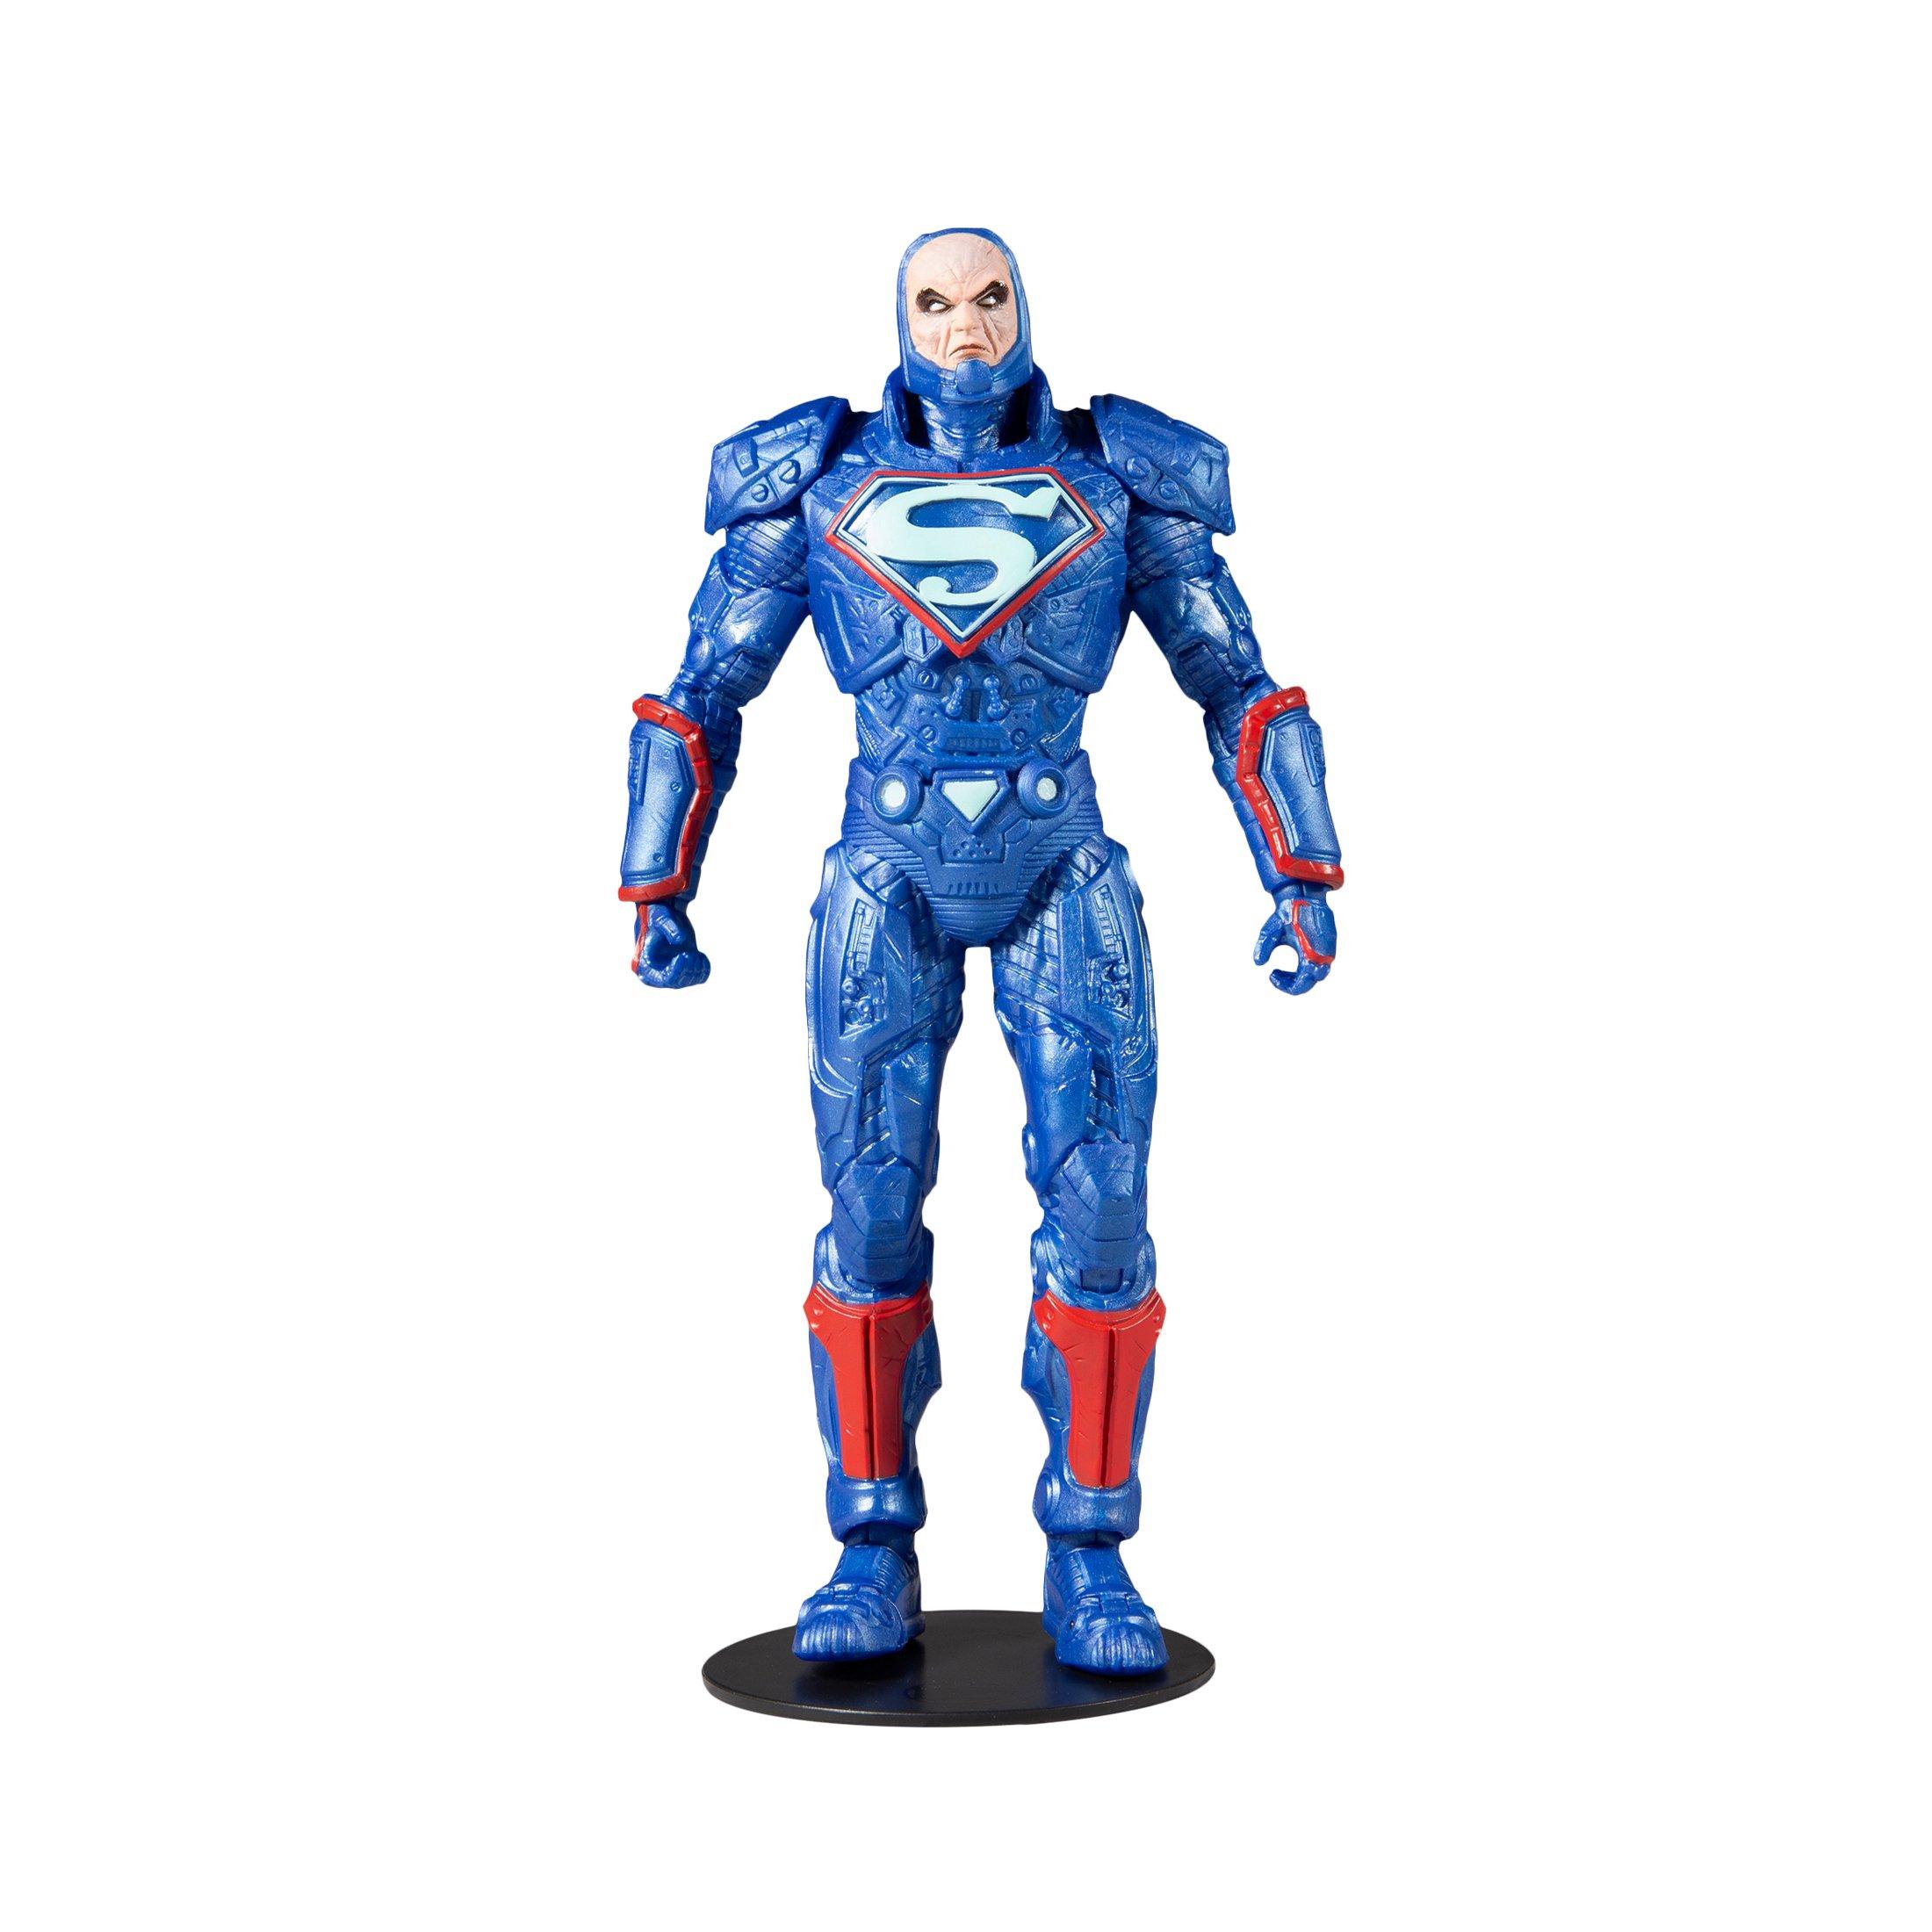 McFarlane Toys DC Multiverse Lex Luthor-in Blue Power Suit Throne 7-in Action Figure